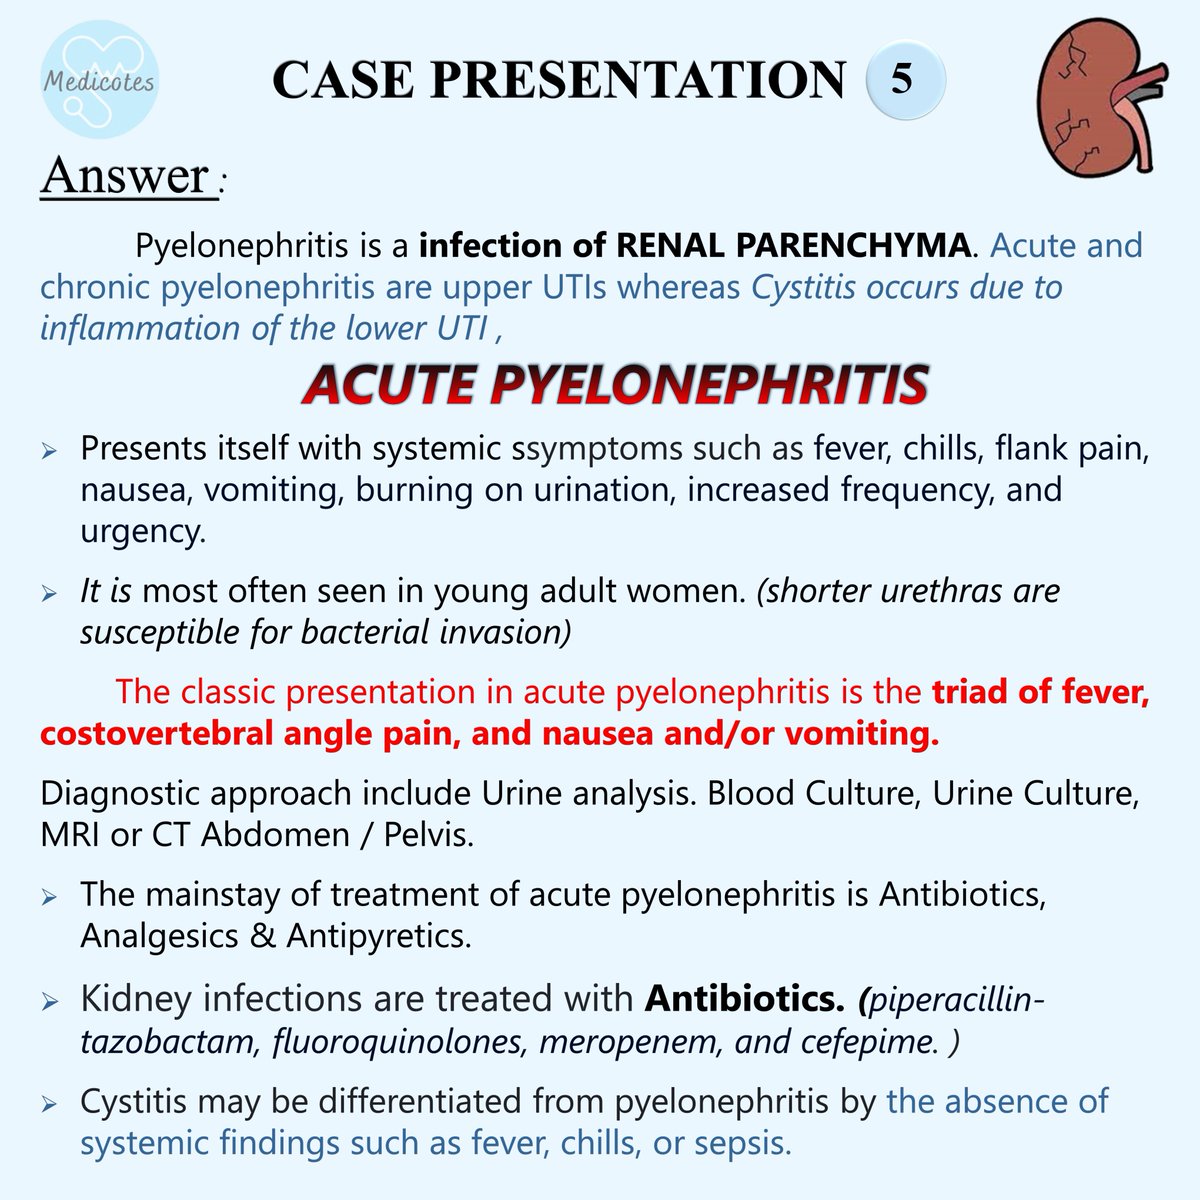 Acute pyelonephritis is a bacterial infection causing inflammation of the kidneys.

Complication include urosepsis, renal abscess, septic shock and acute kidney injury (AKI)

#medicotes #medi_cotes #questformedicine #acutepyelonephritis #questformedicine  #meded #urology